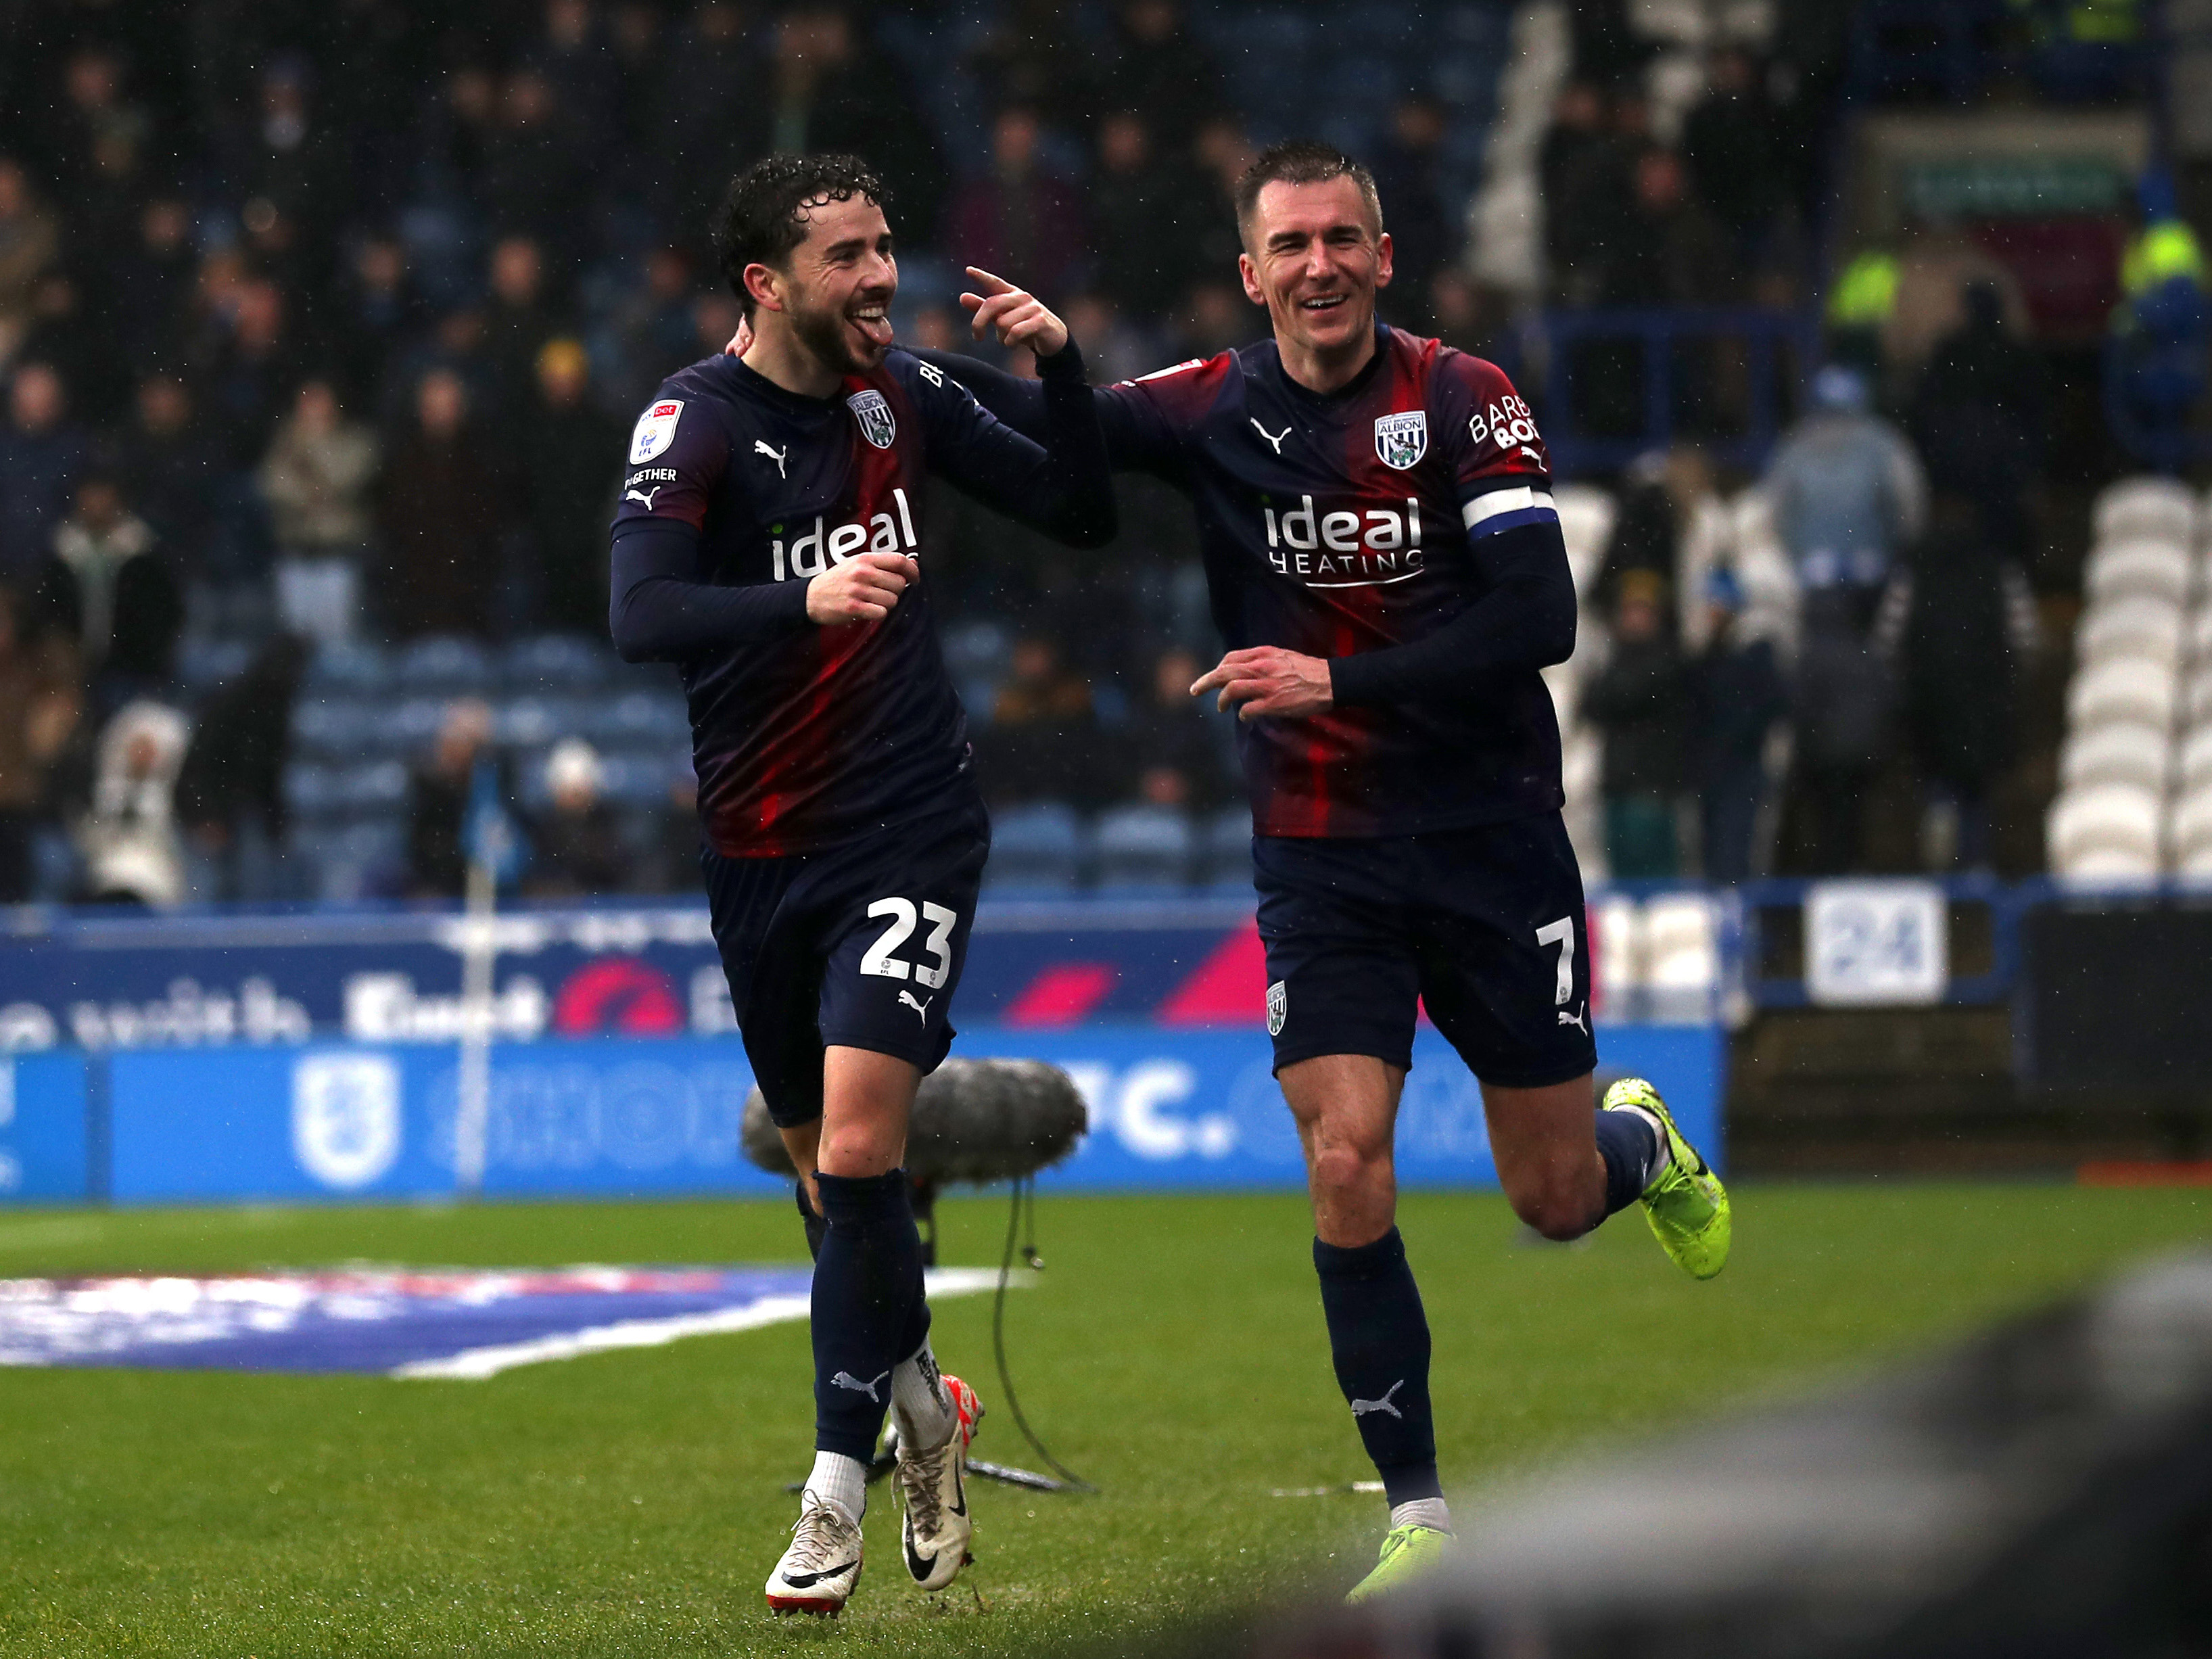 An image of Mikey Johnston and Jed Wallace celebrating a goal